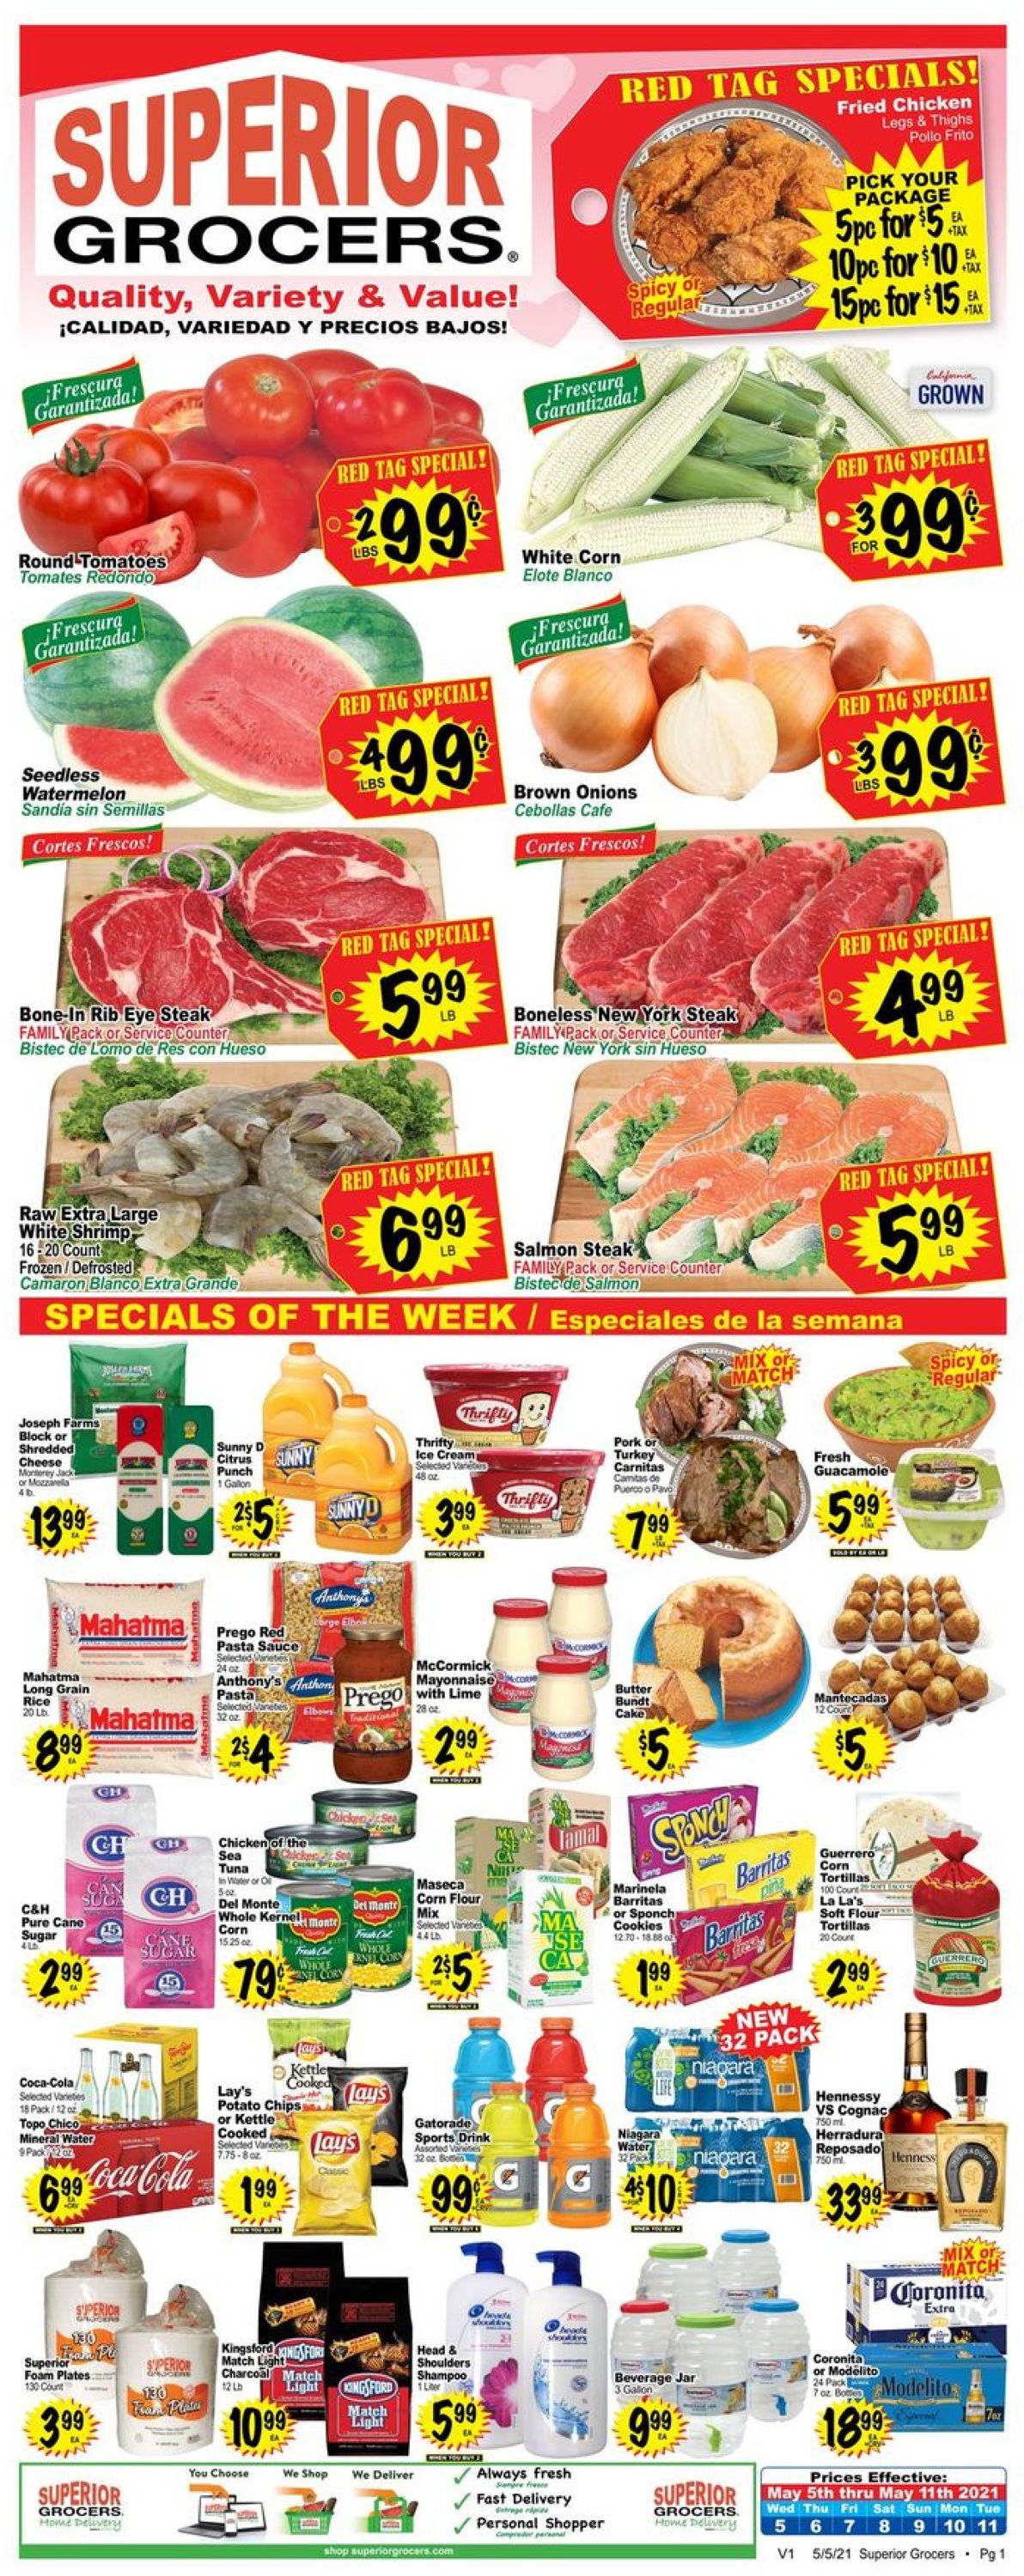 Superior Grocers Current weekly ad 05/05 - 05/11/2021 - frequent-ads.com